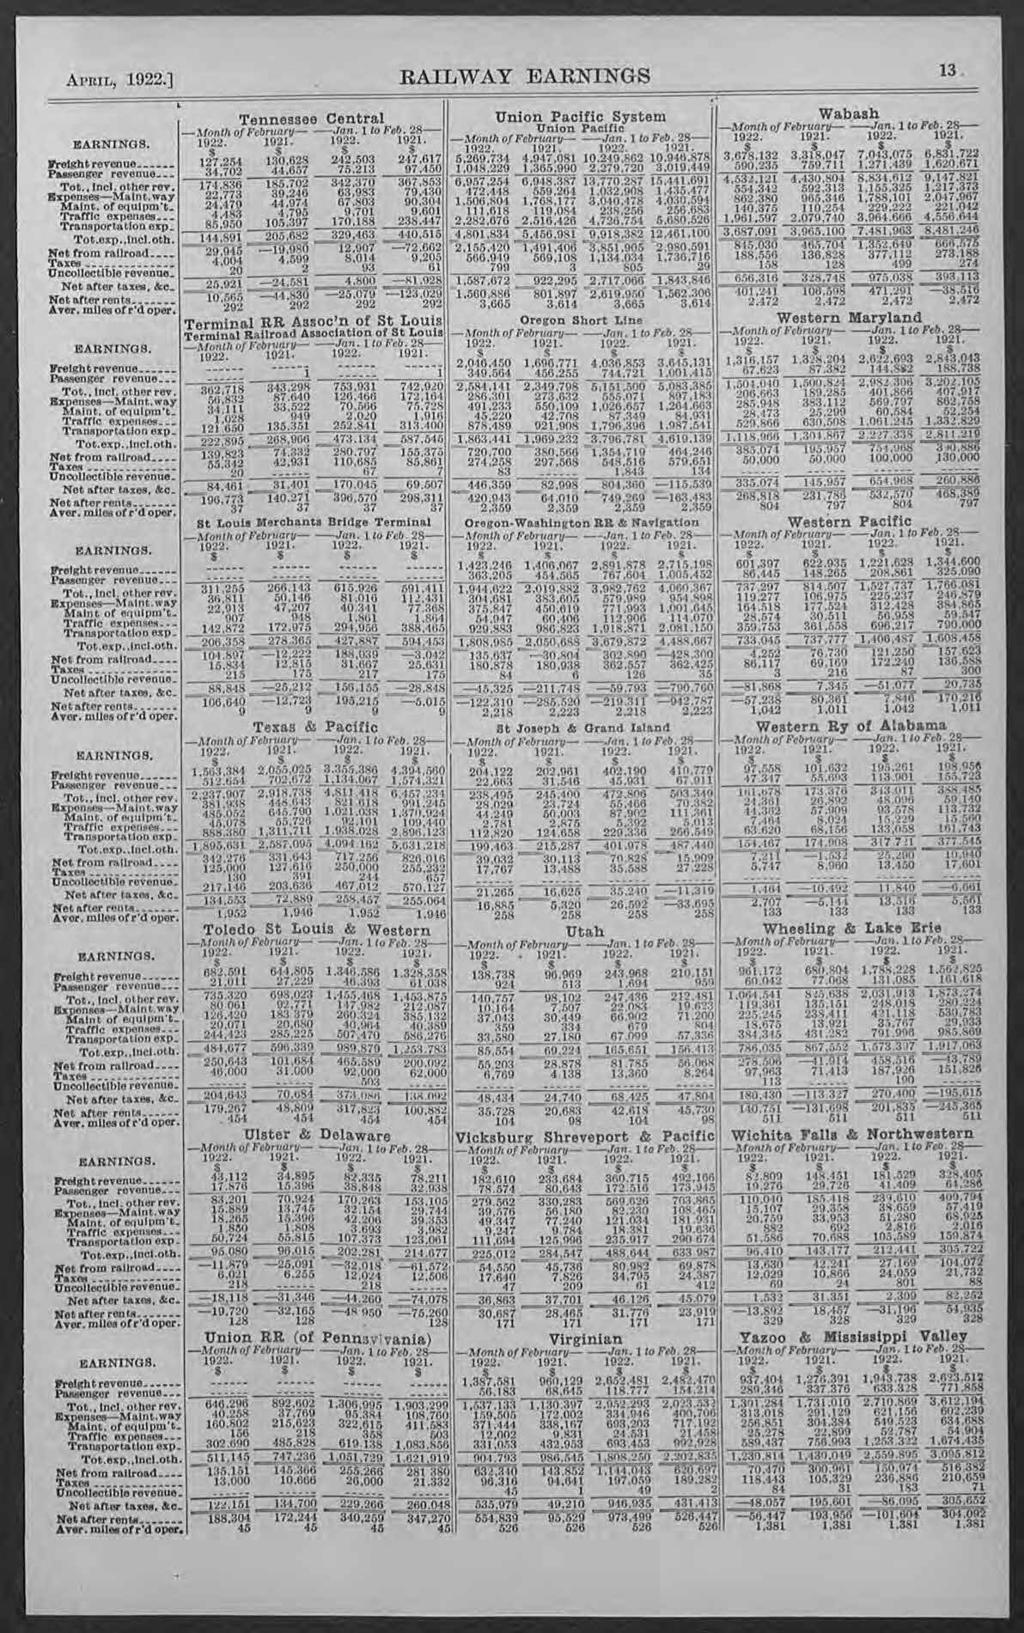 APRIL, 1922.] RAILWAY EARNINGS 13.. Tot., incl. other rev. Transportation exp Tot.exp.,incl.oth. Net from railroad.._ Uncollectible revenue.. Tot., incl. other rev. Expenses-Maint. way _ Tot.exp.,incl.oth. Net from railroad... - - _.